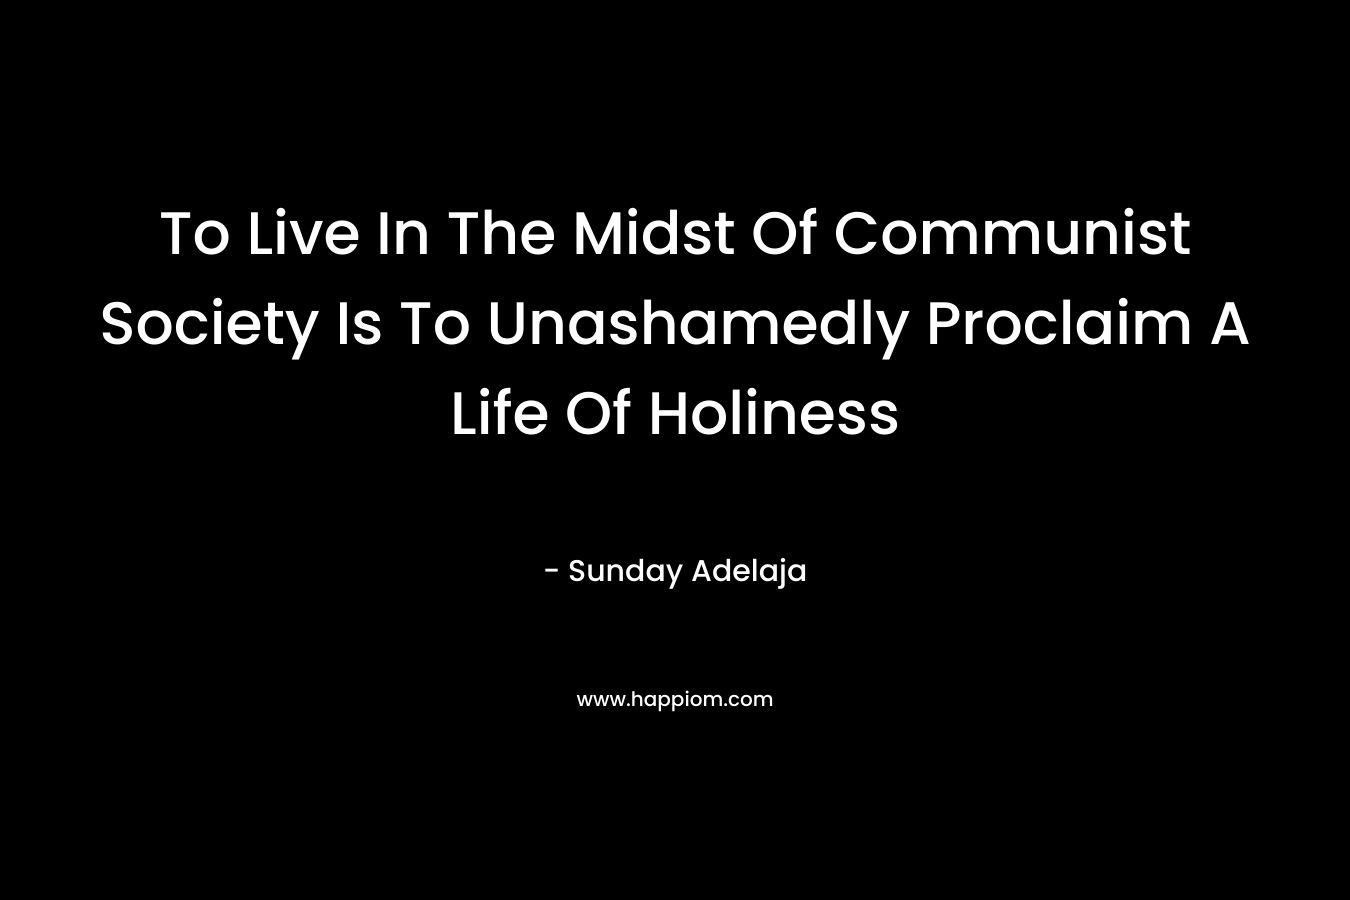 To Live In The Midst Of Communist Society Is To Unashamedly Proclaim A Life Of Holiness – Sunday Adelaja